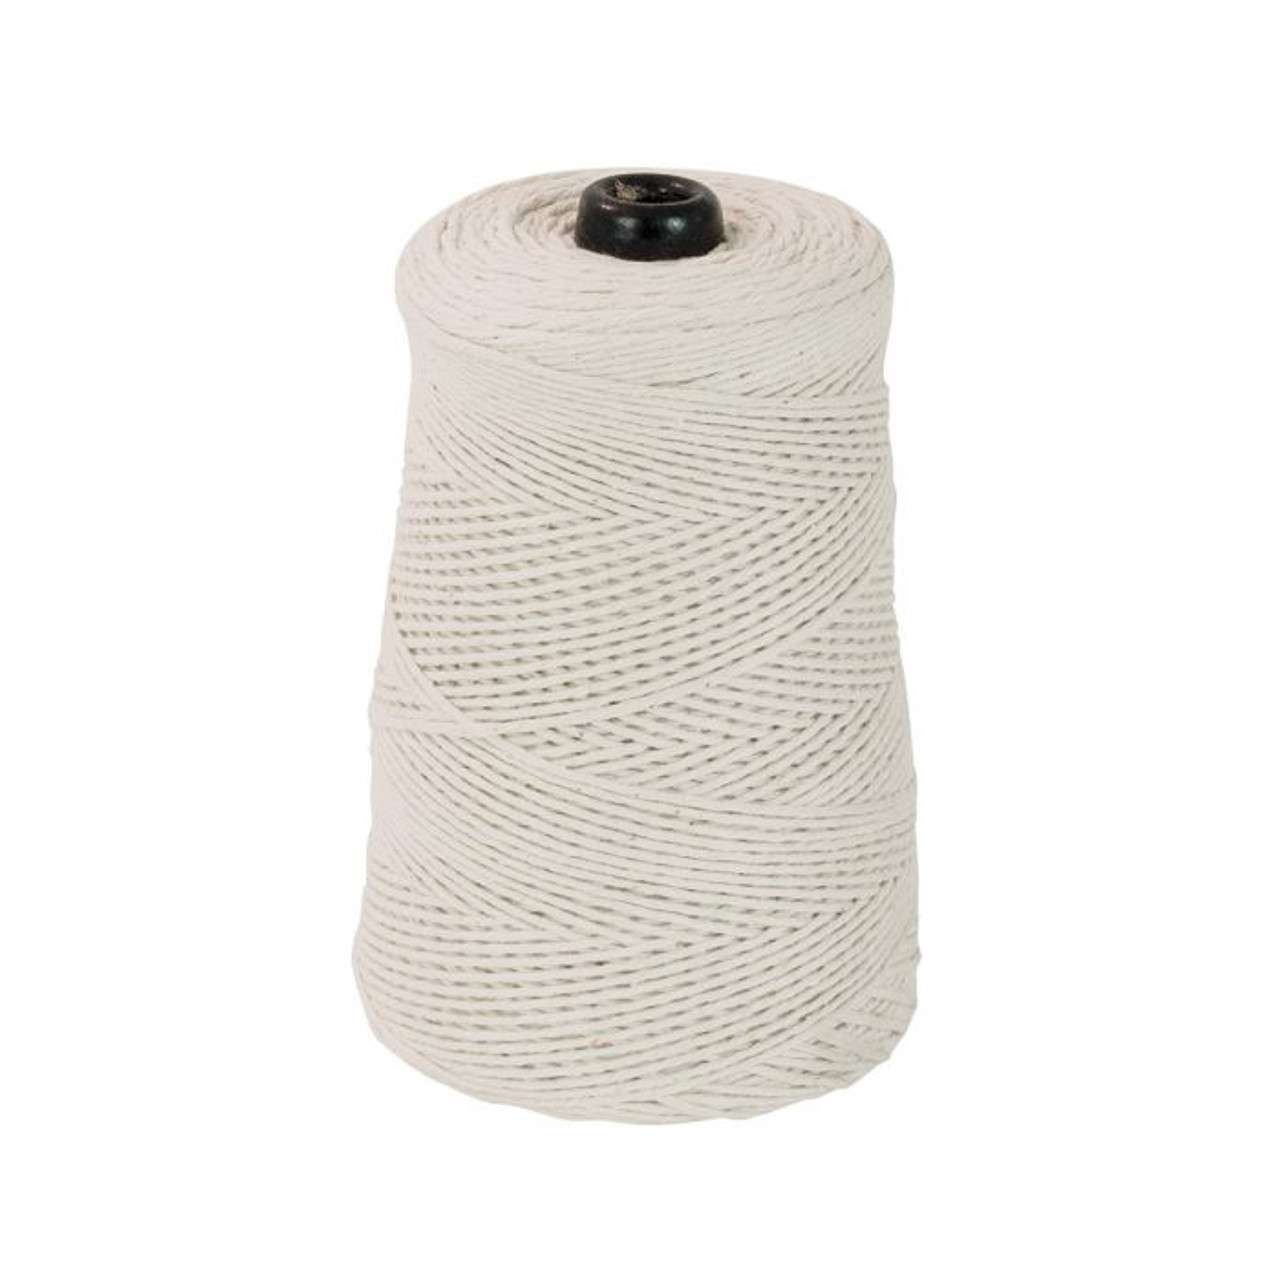 16 Ply White Cotton Butcher Twine String Rope 2,520 Feet 840 Yard Craft  String Cone 1.9 Lbs, Baker's Twine 